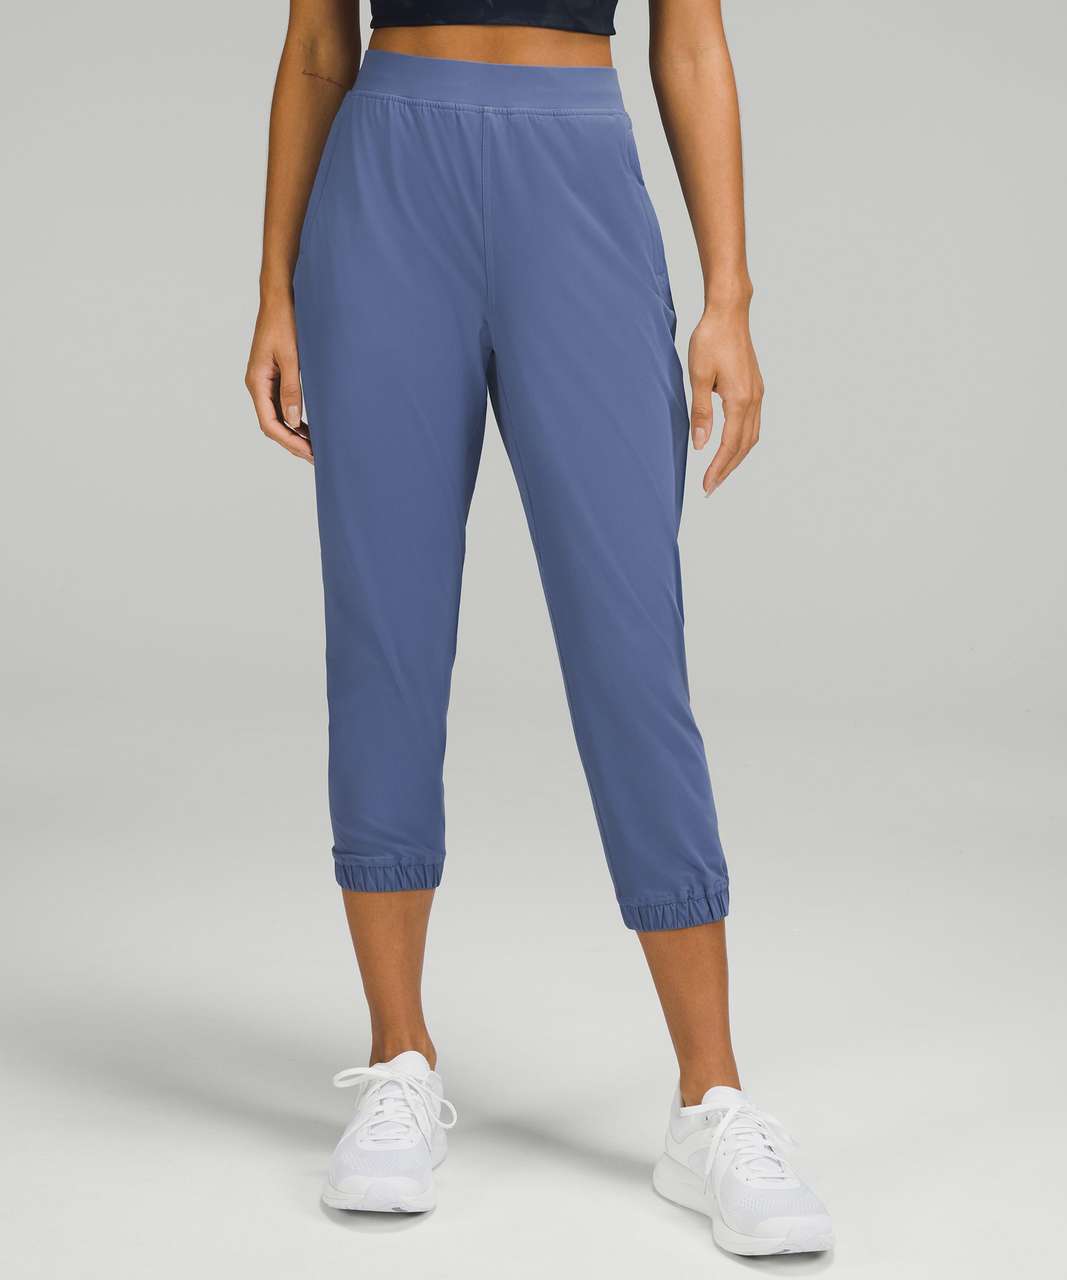 Lululemon Adapted State High-Rise Cropped Jogger 23" - Water Drop